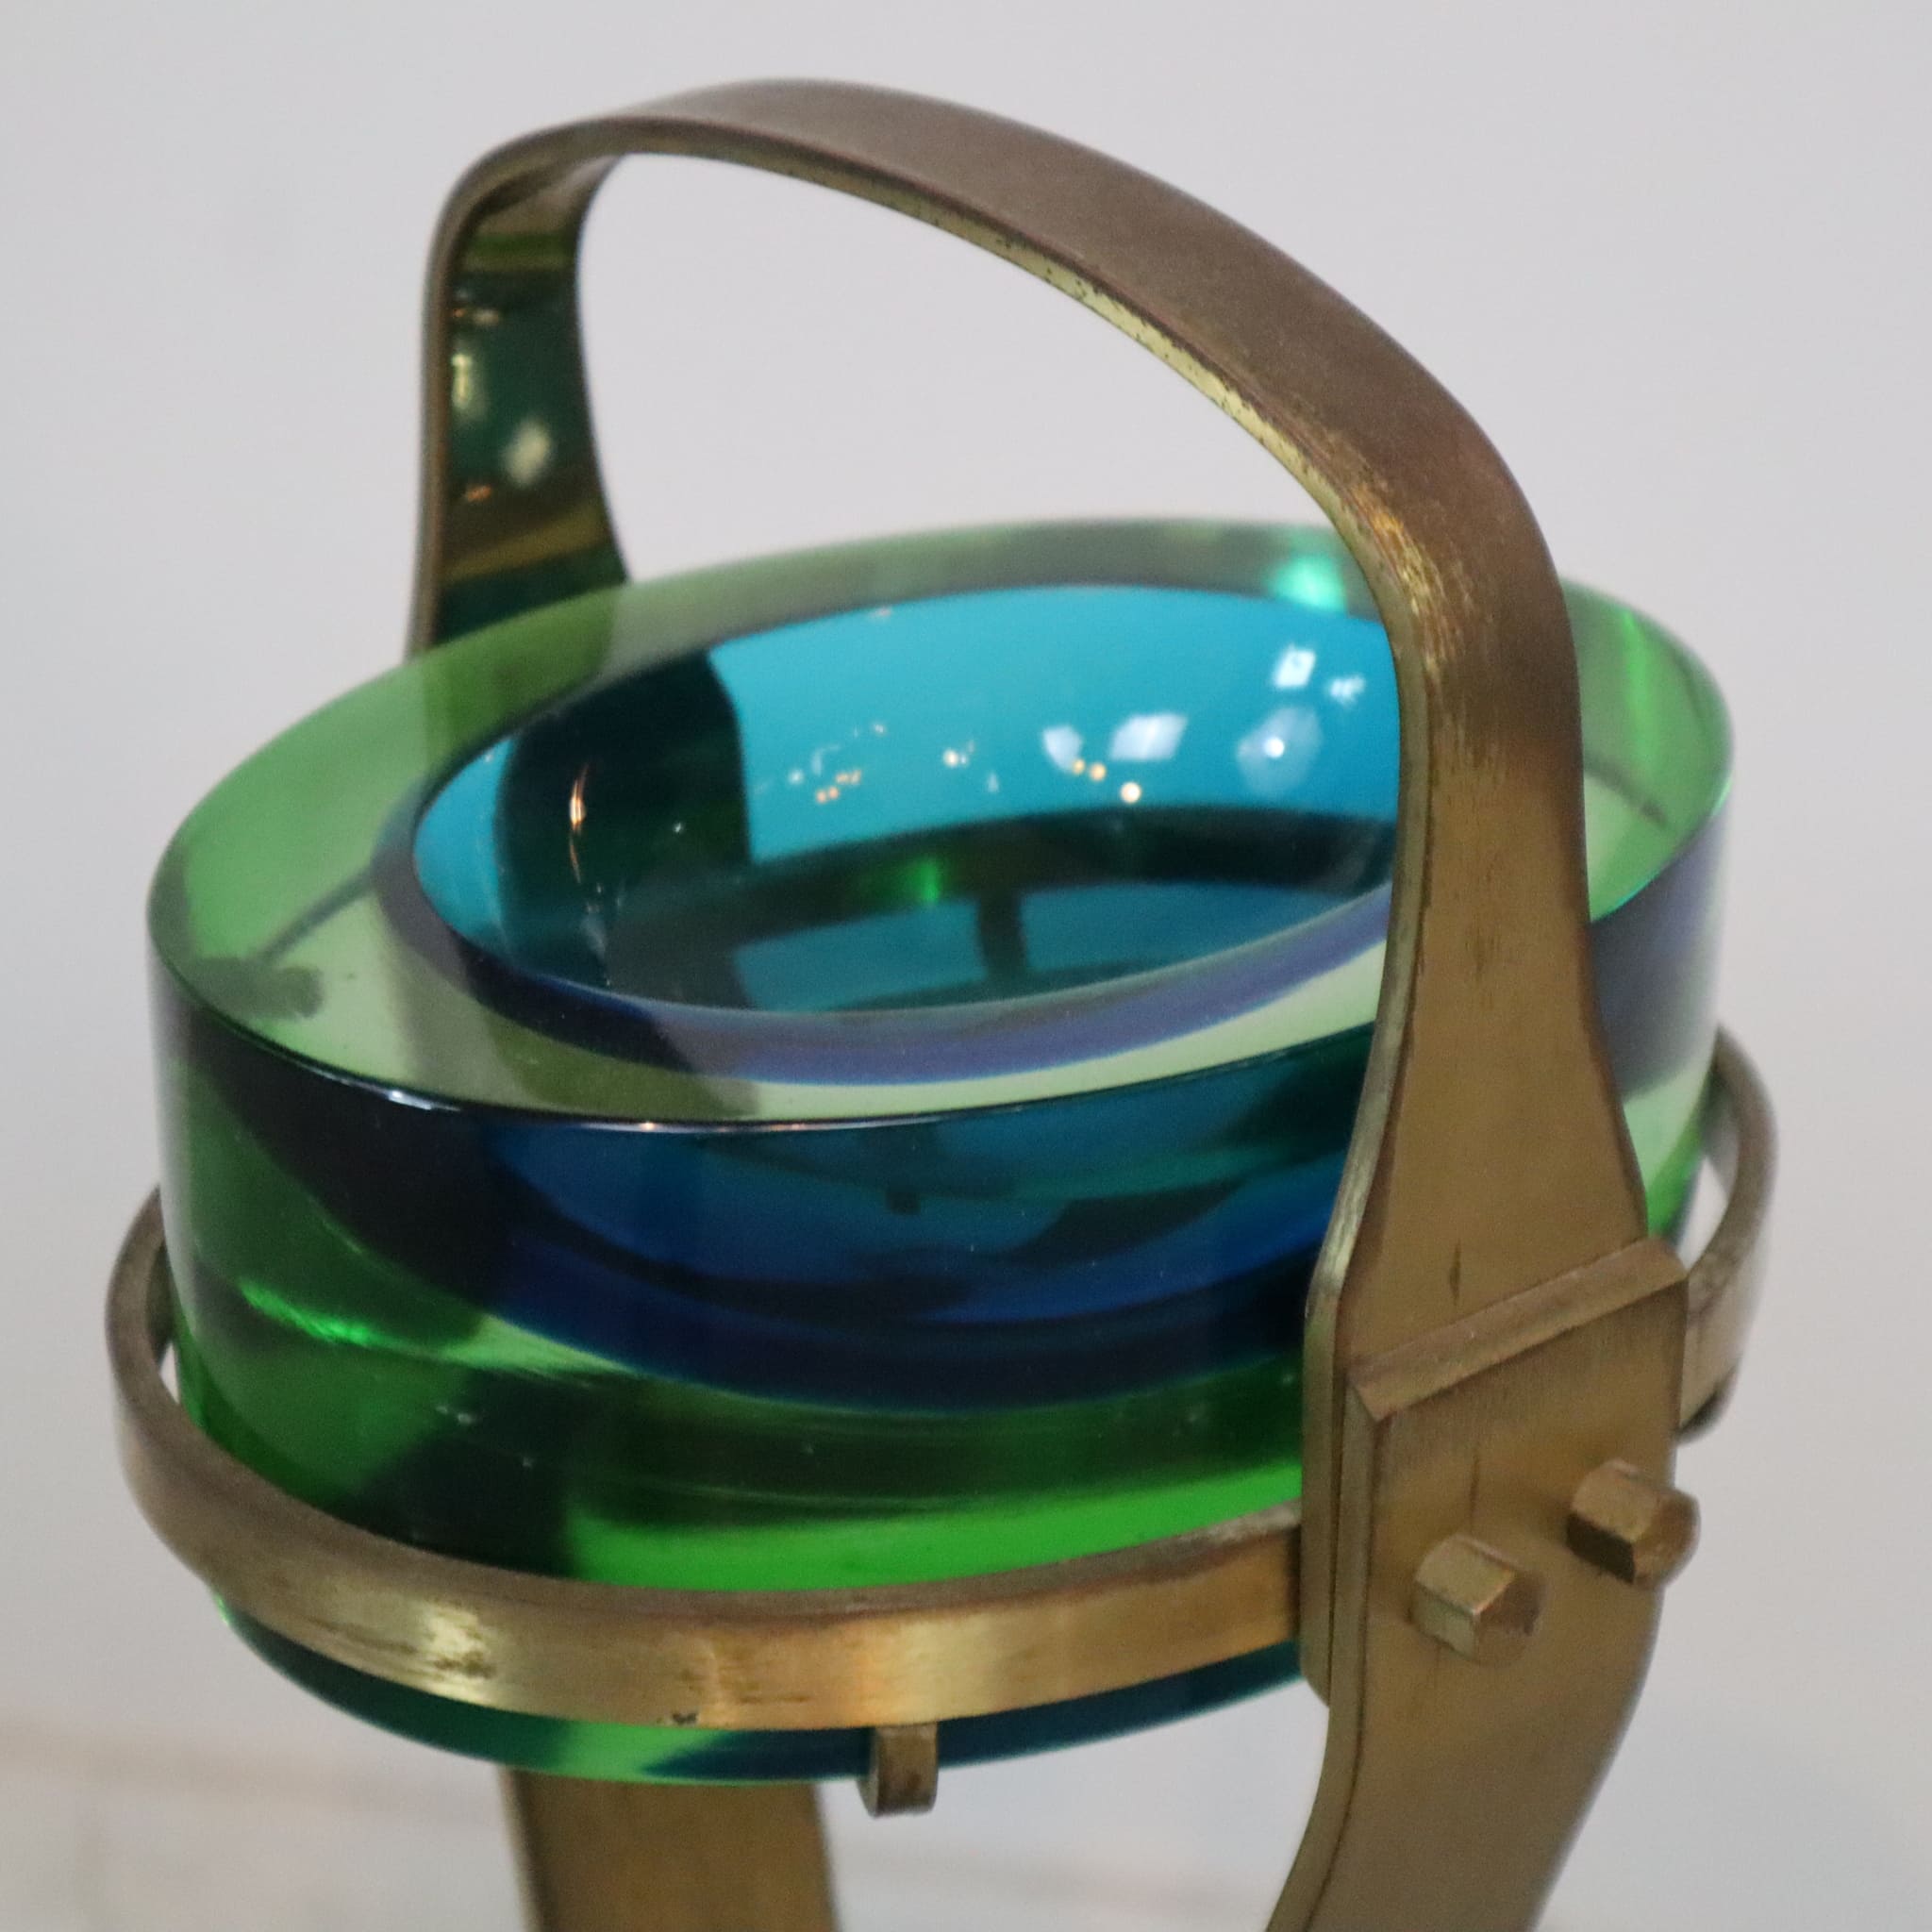 visionidepoca-modern-art-ashtray-entrance-vintage-60s-70s-brass-structure-base-in-murano-glass-green-and-blue-detail